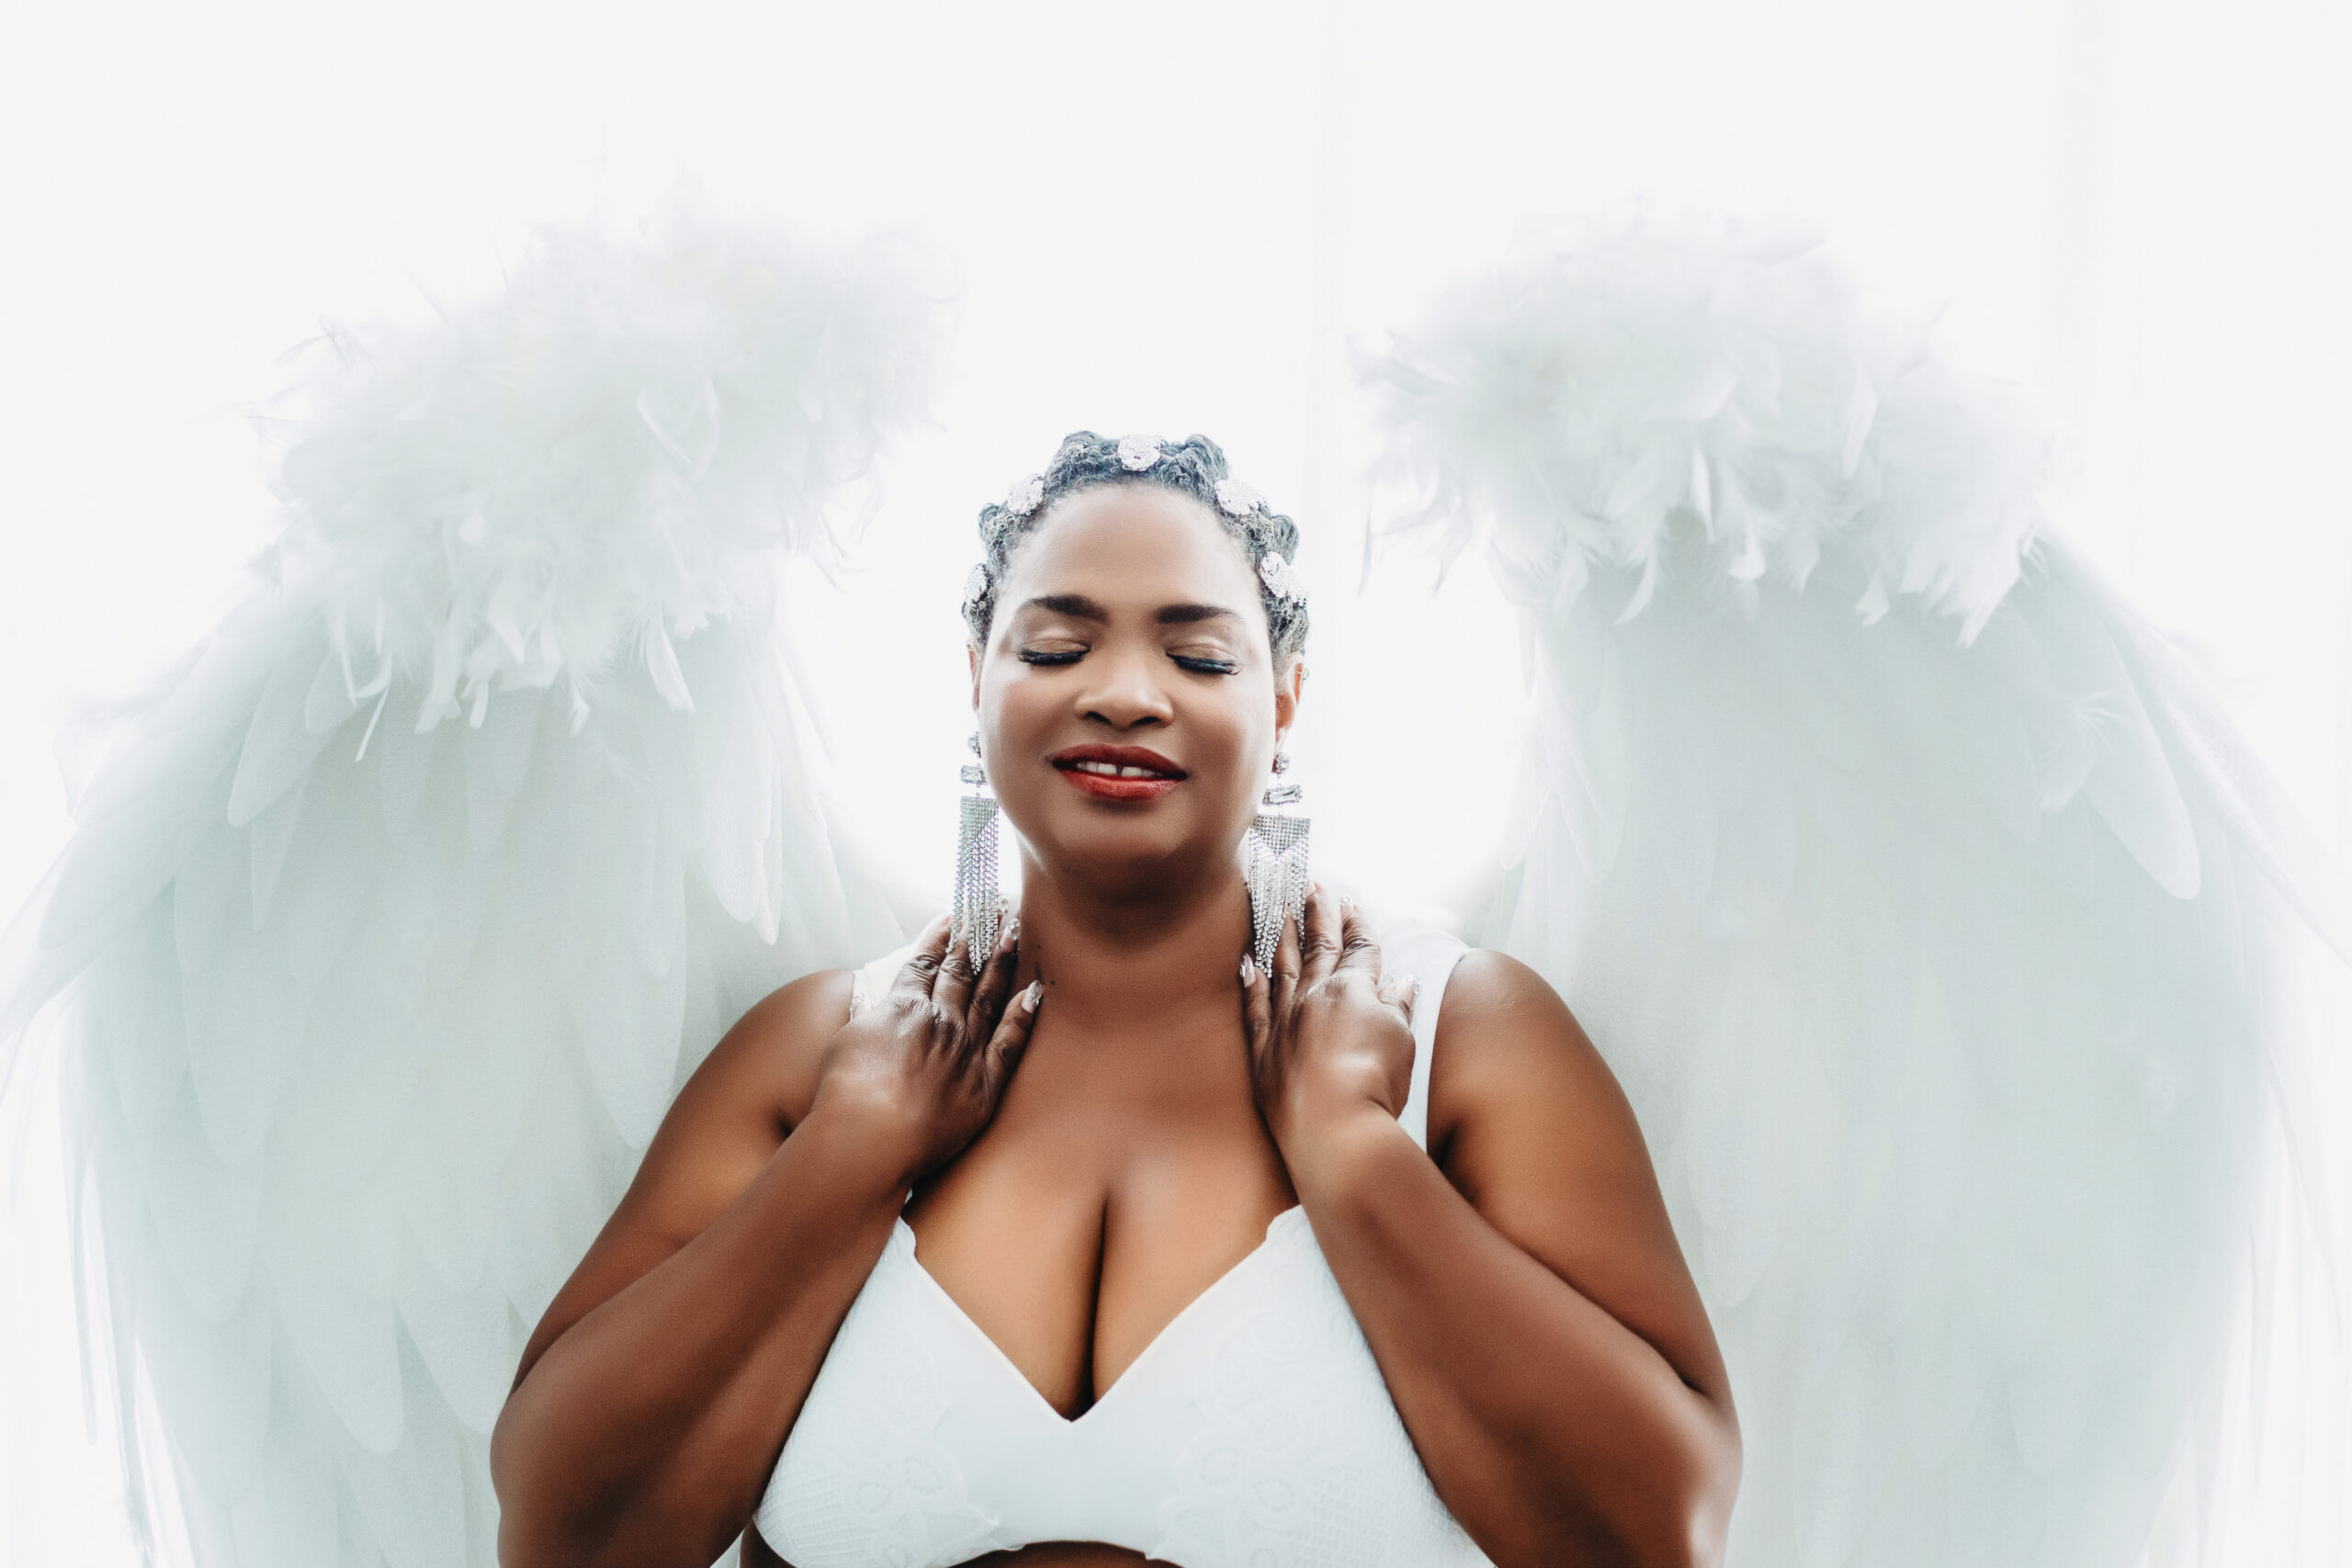 African American woman in a white bra with white angel wings with a white backdrop. Boudoir photography by Lindsay Hite at Show Your Spark.